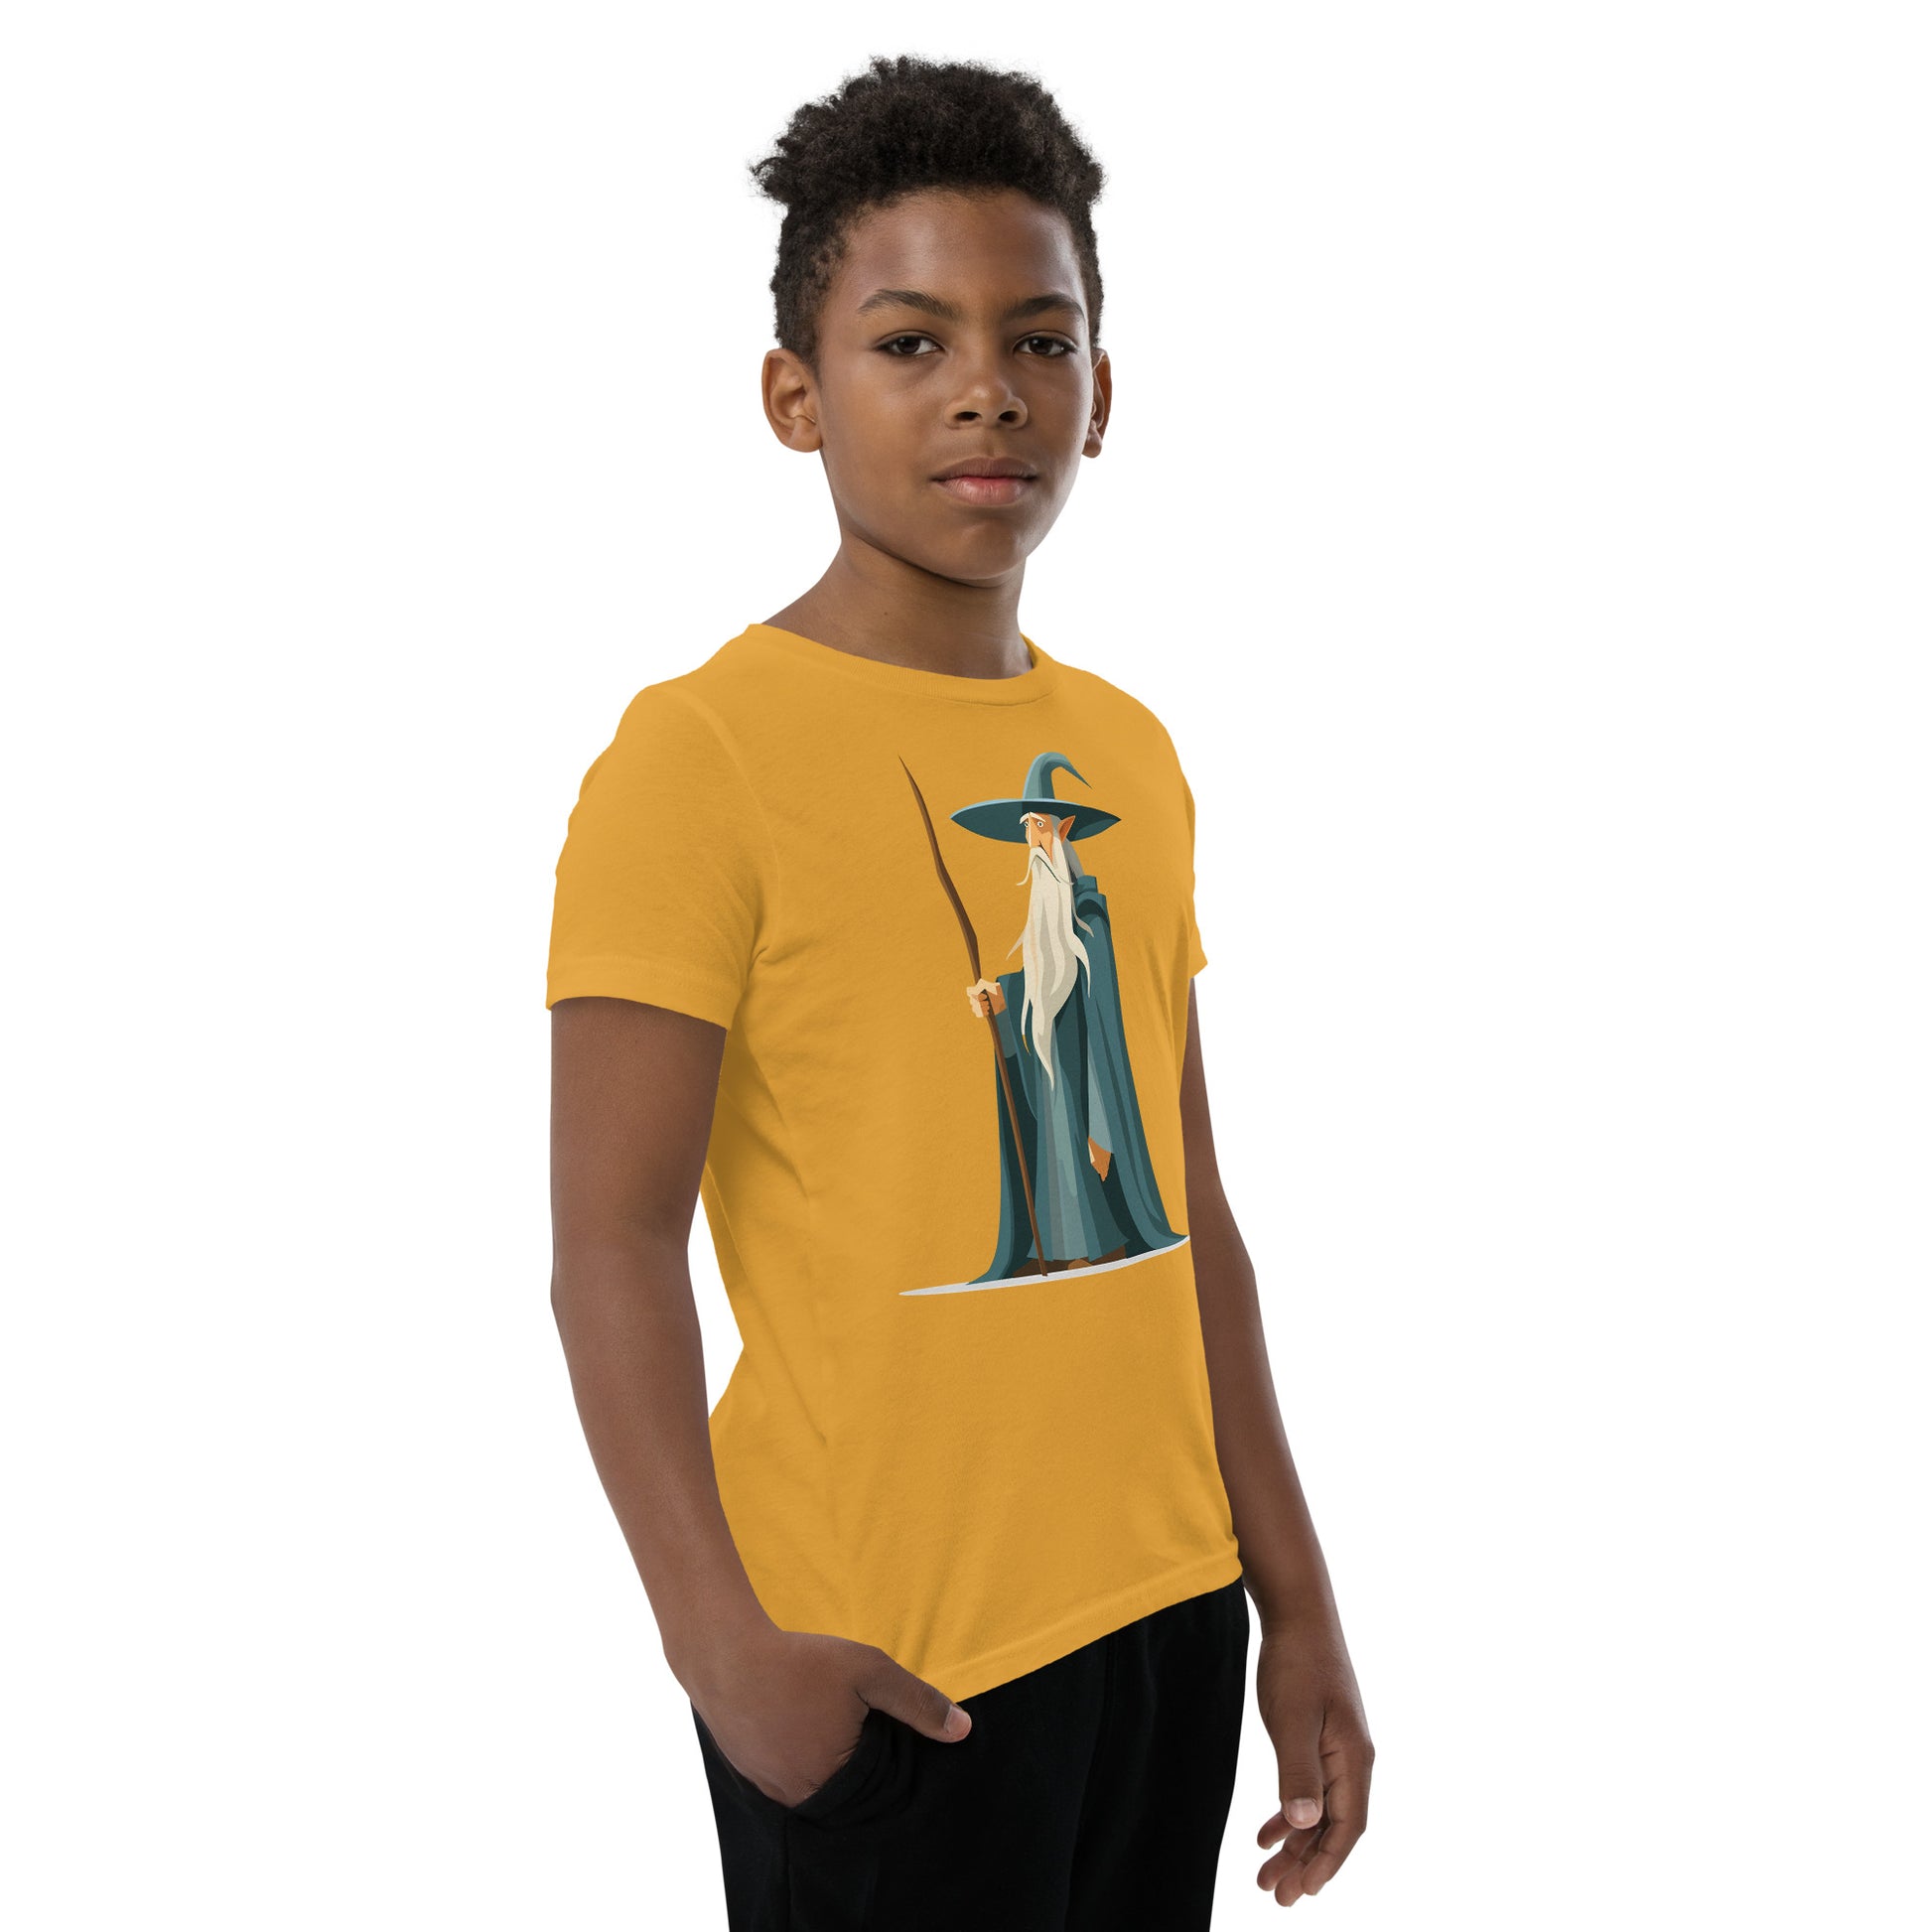 Boy with a mustard T-shirt with a picture of a magician